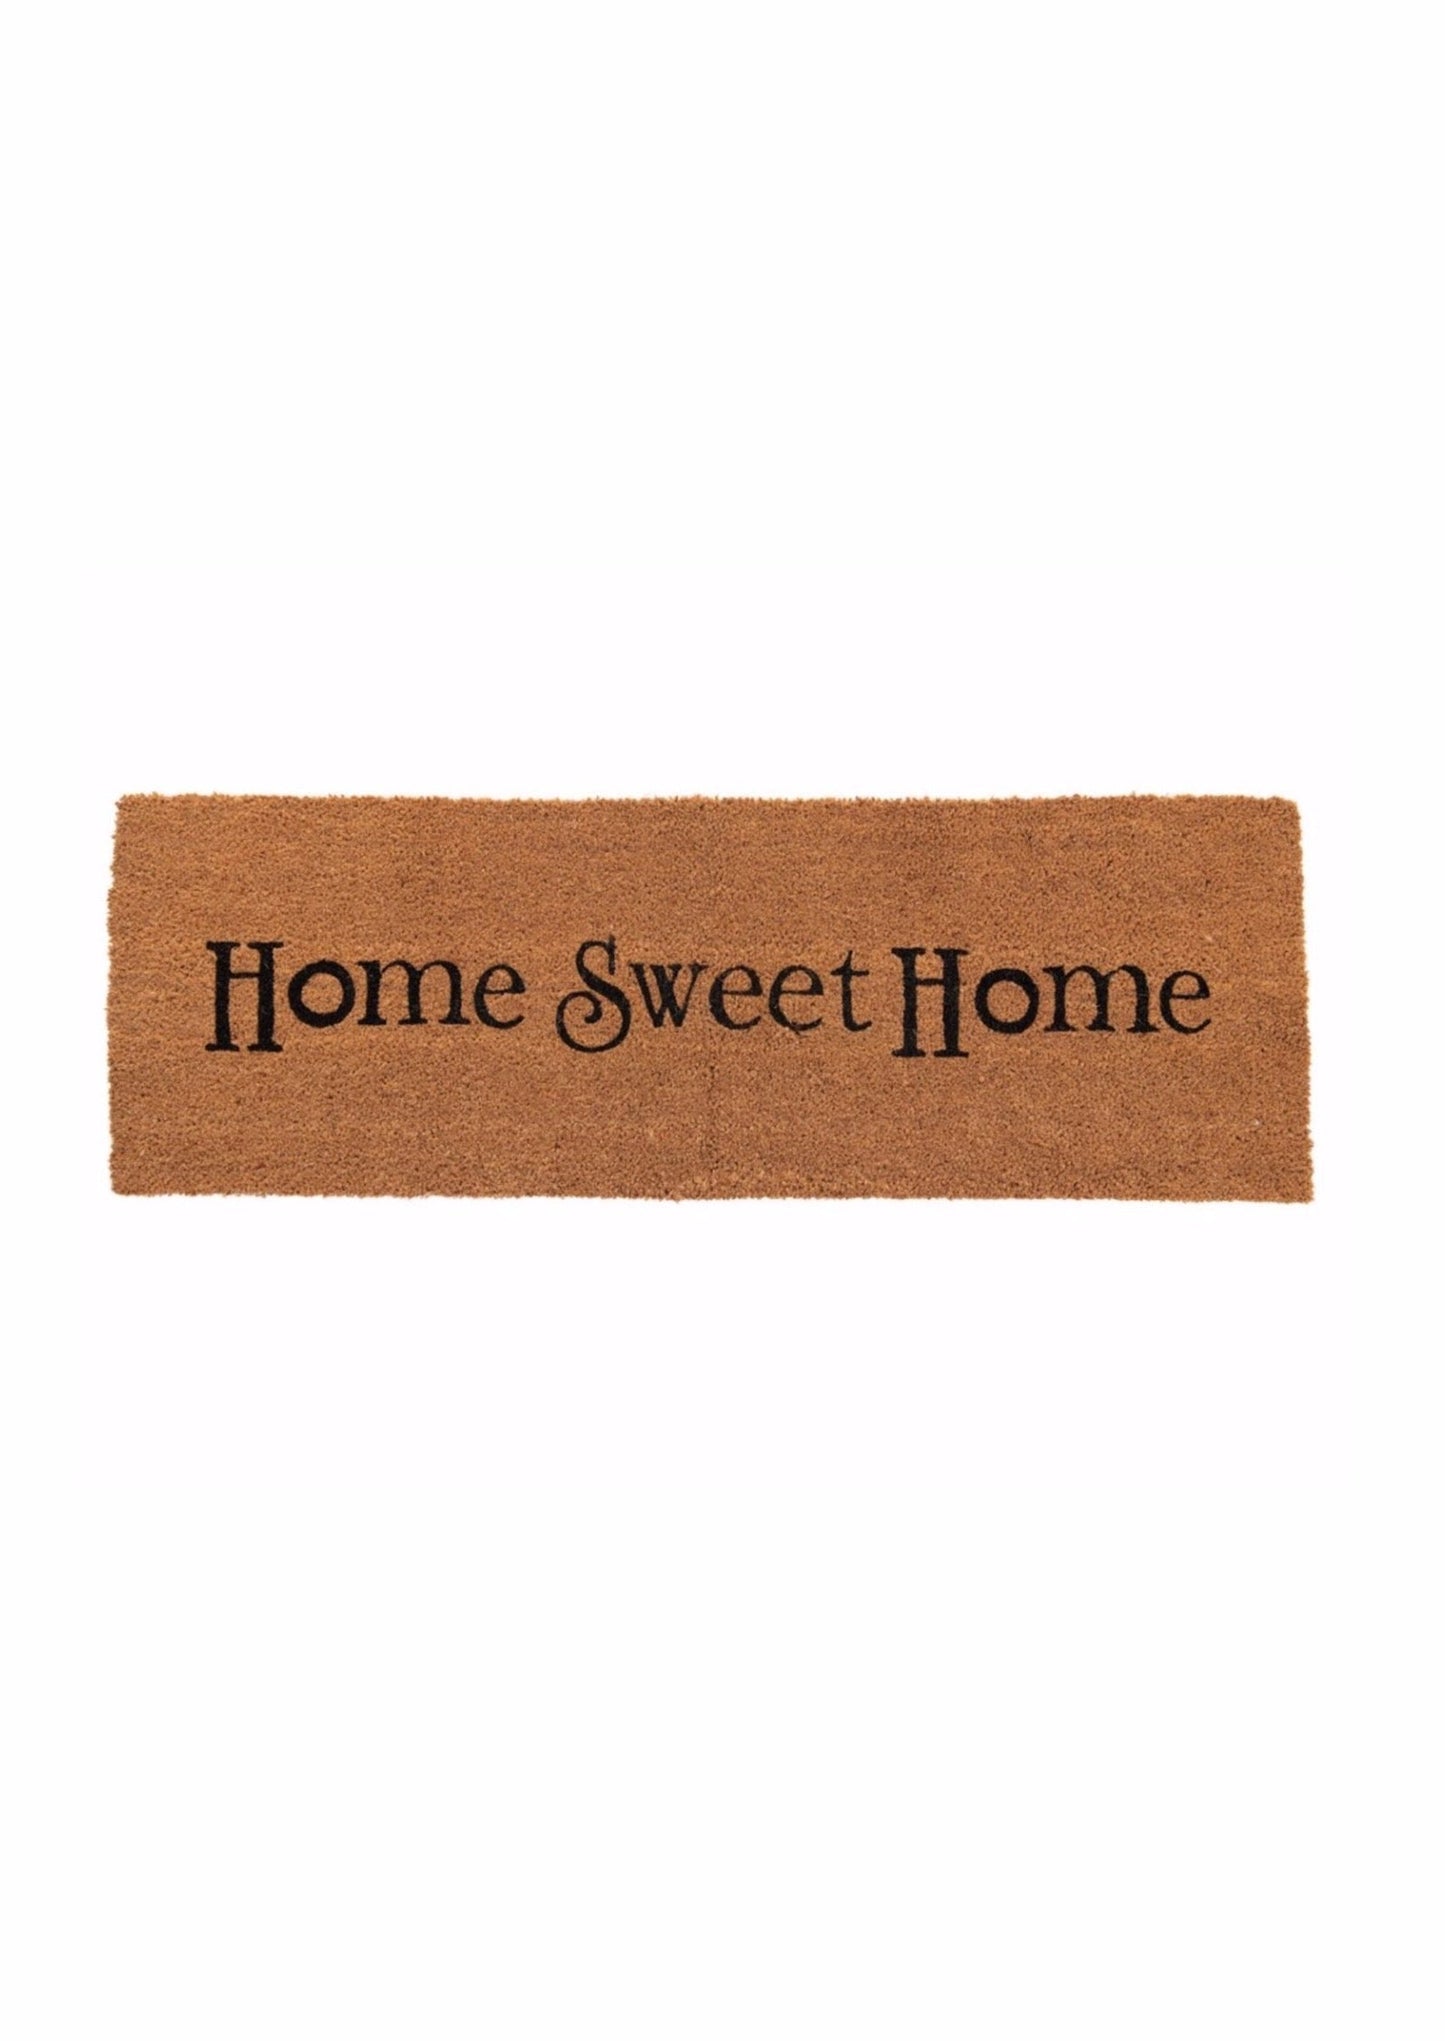 Home Sweet Home Doormat - FINAL SALE Home & Lifestyle